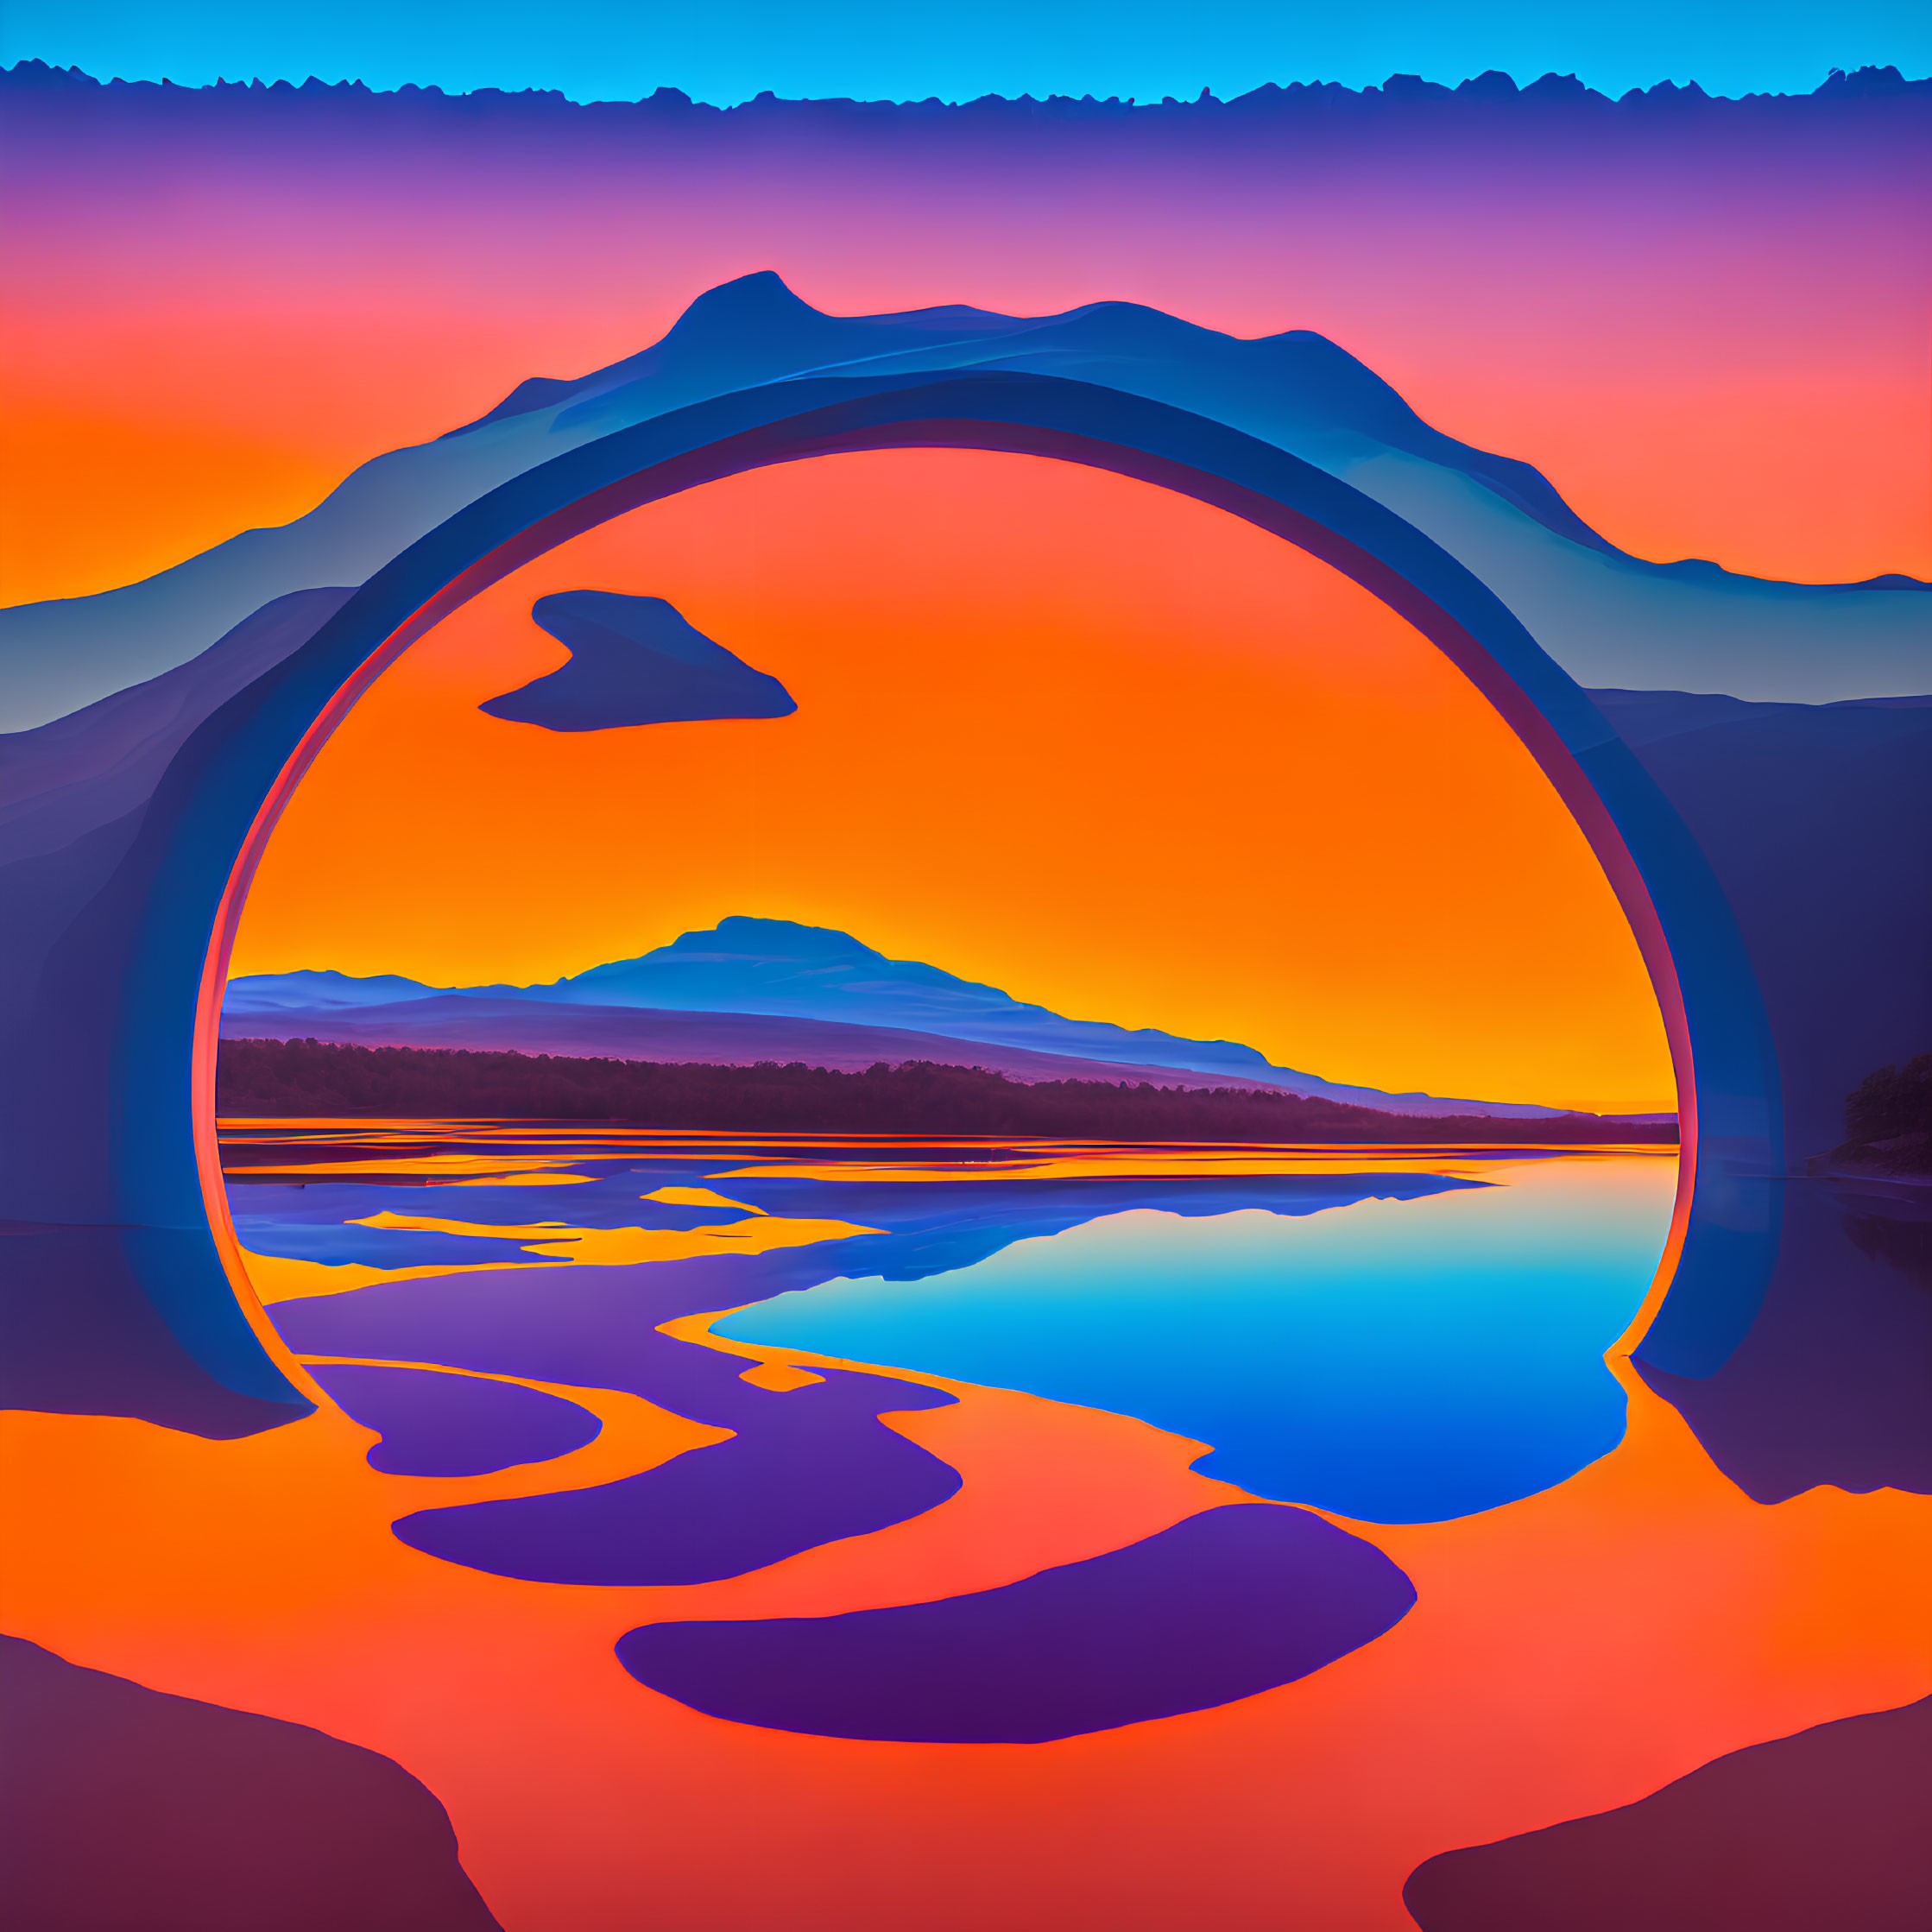 Digital sunset illustration with dolphin silhouette and mountain landscape reflected in water